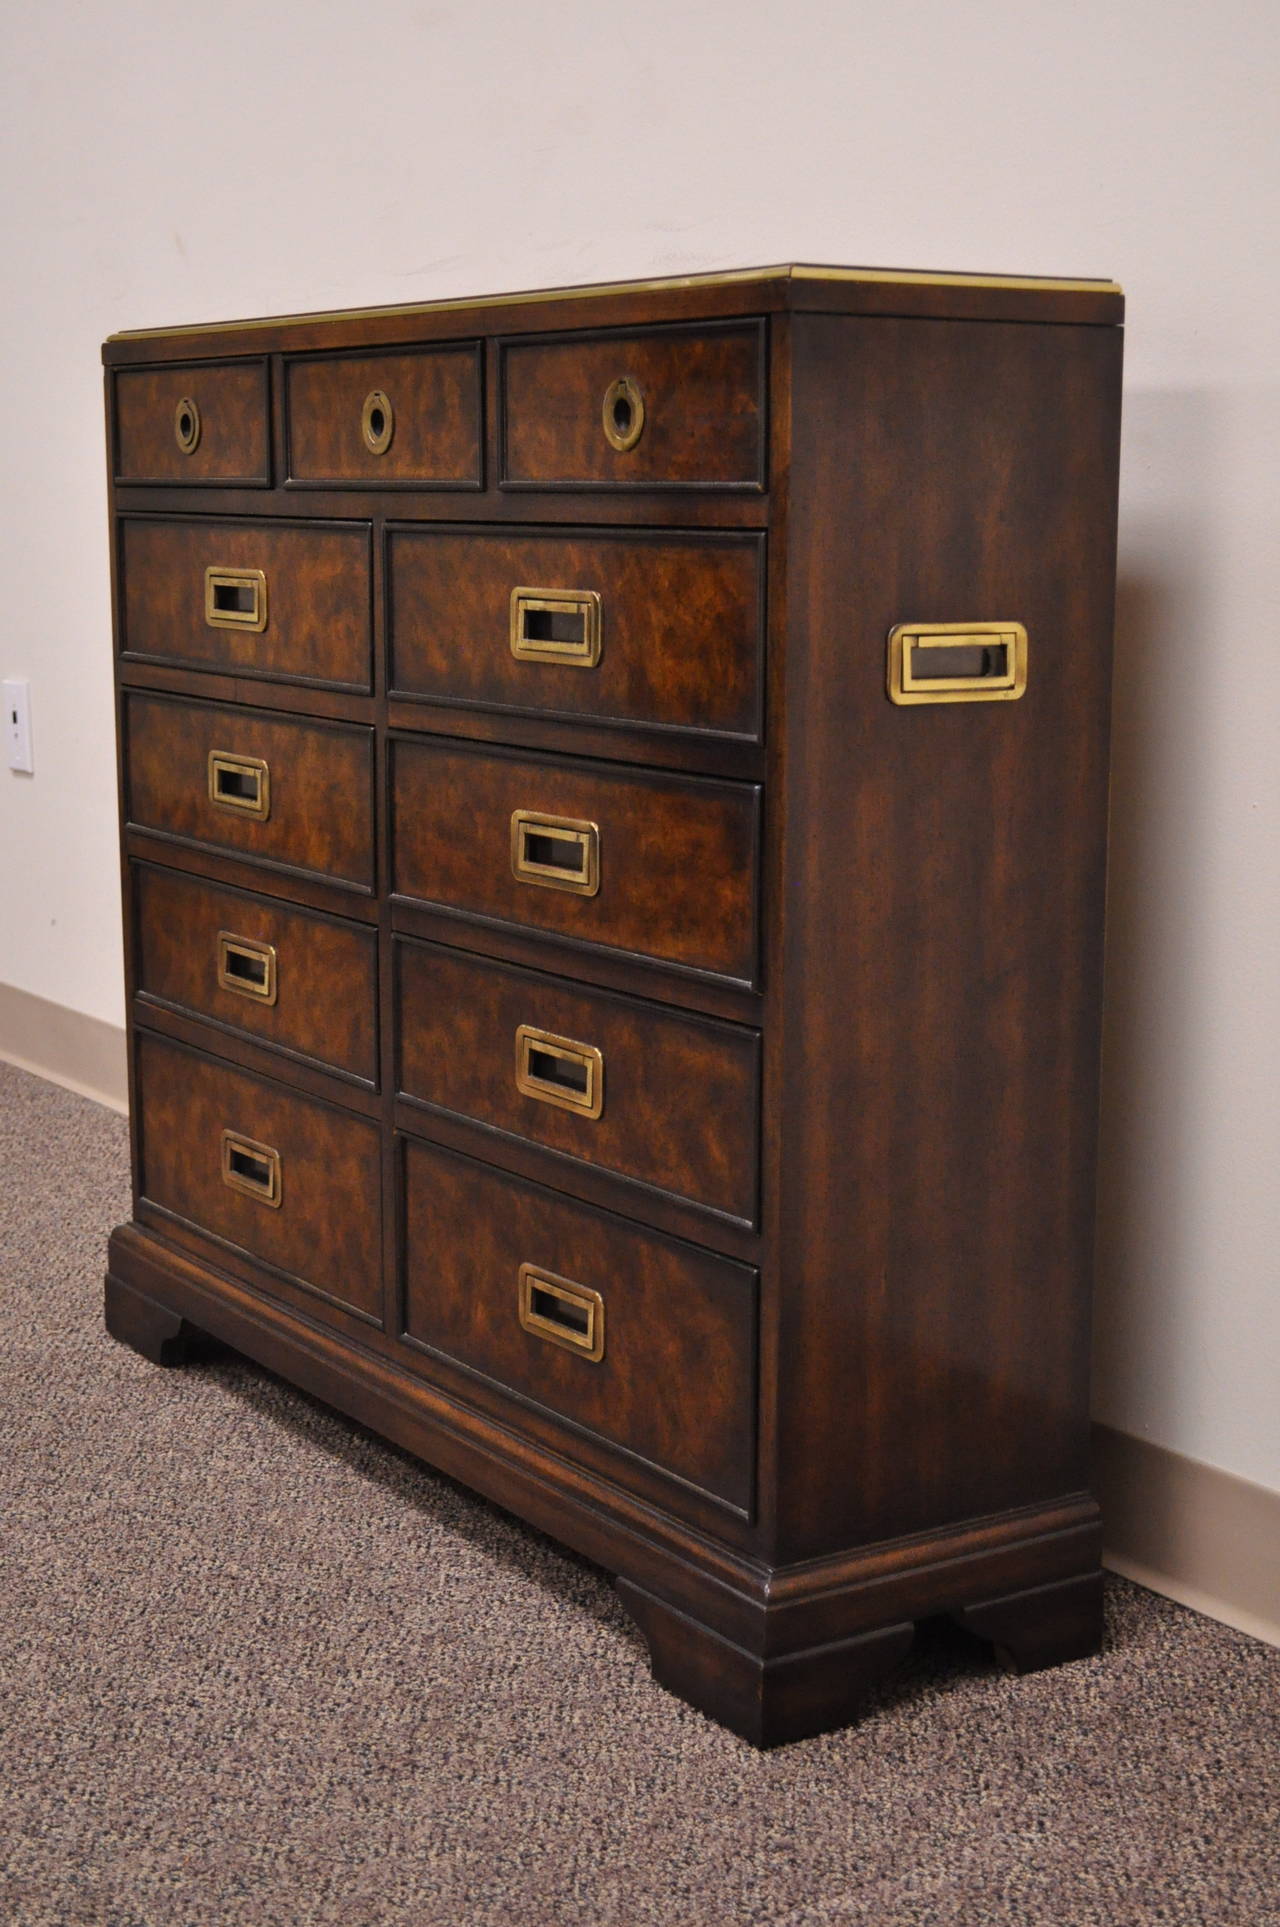 Very Unique Vintage, Tooled Leather Top, Narrow Campaign Style Chest by Drexel Heritage. This piece features 9 dovetailed drawers, inset brass pulls on the drawer fronts and sides, gold gilt trim, and beautiful woodgrain. Chest would work wonderful